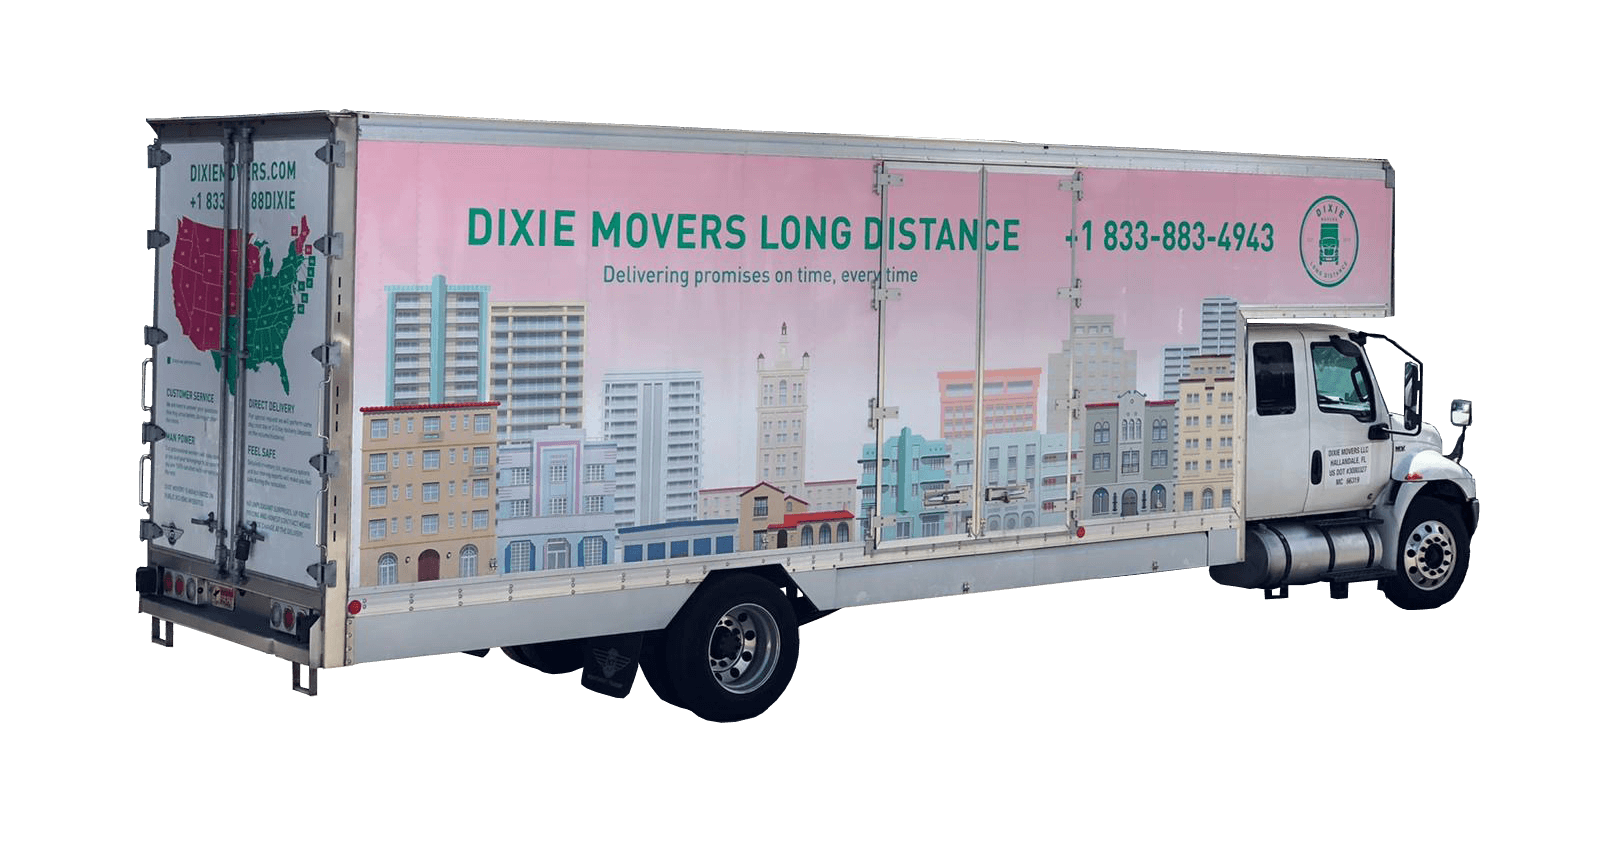 Dixie Movers - Long Distance Moves 2